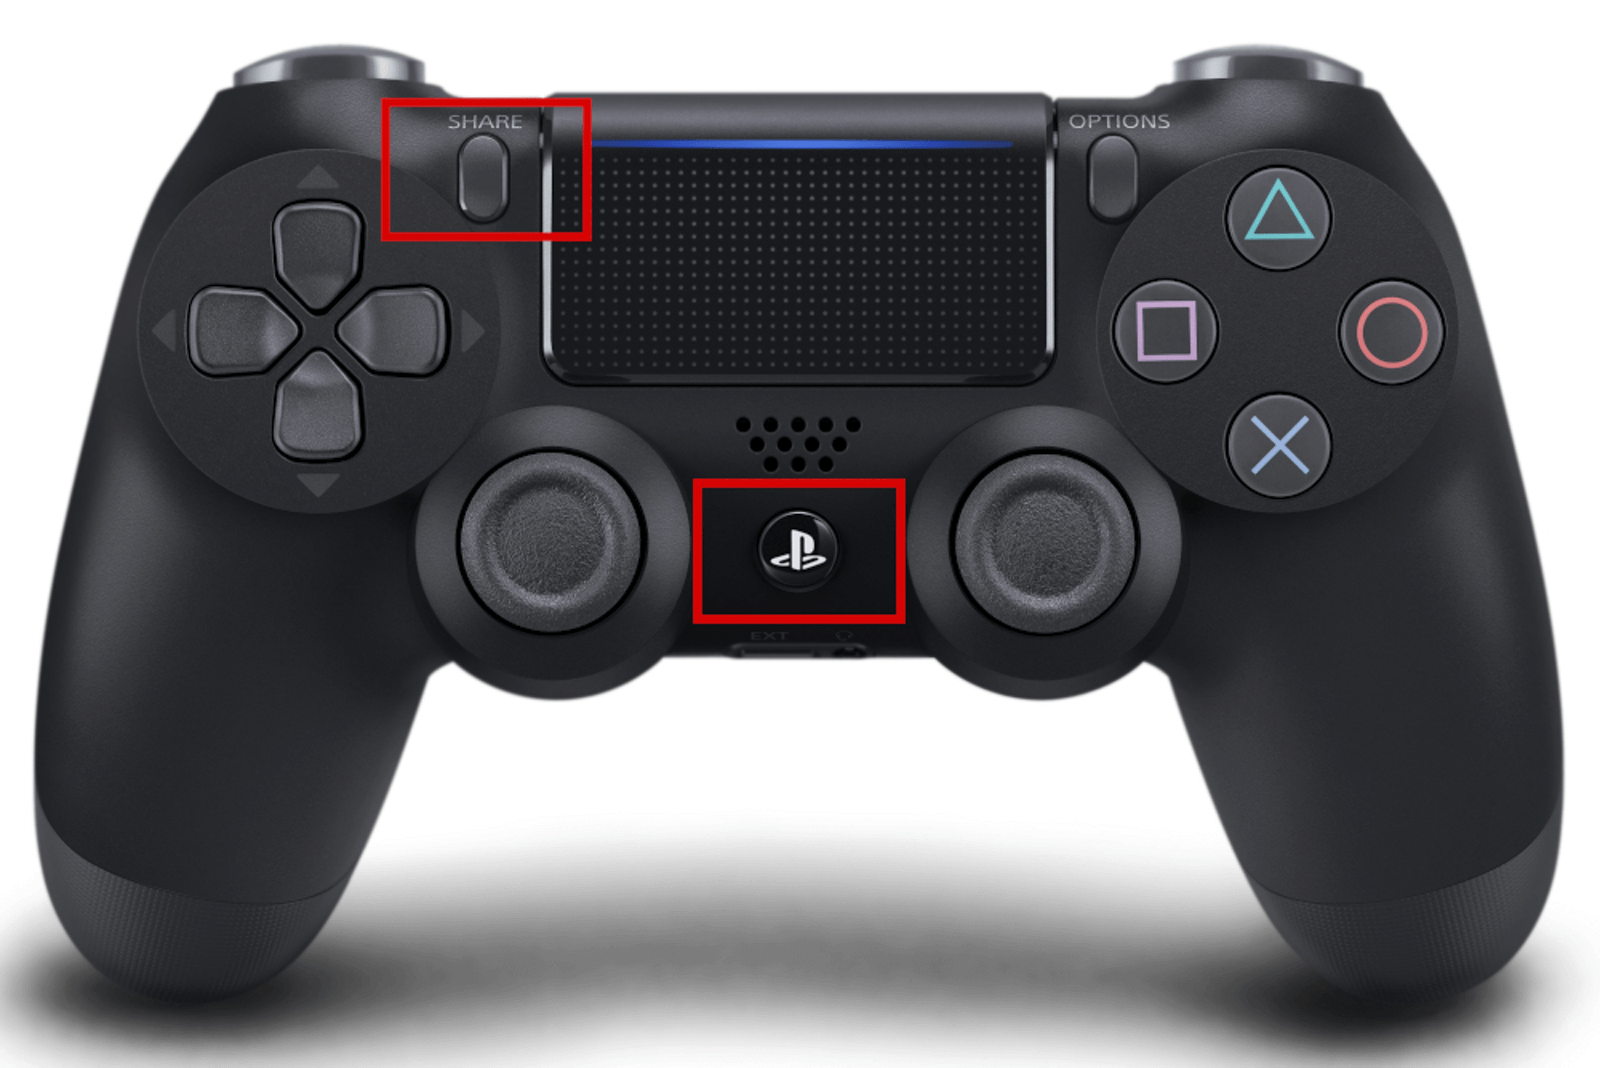 Press PS and Share button to connect PS4 Controller to PC